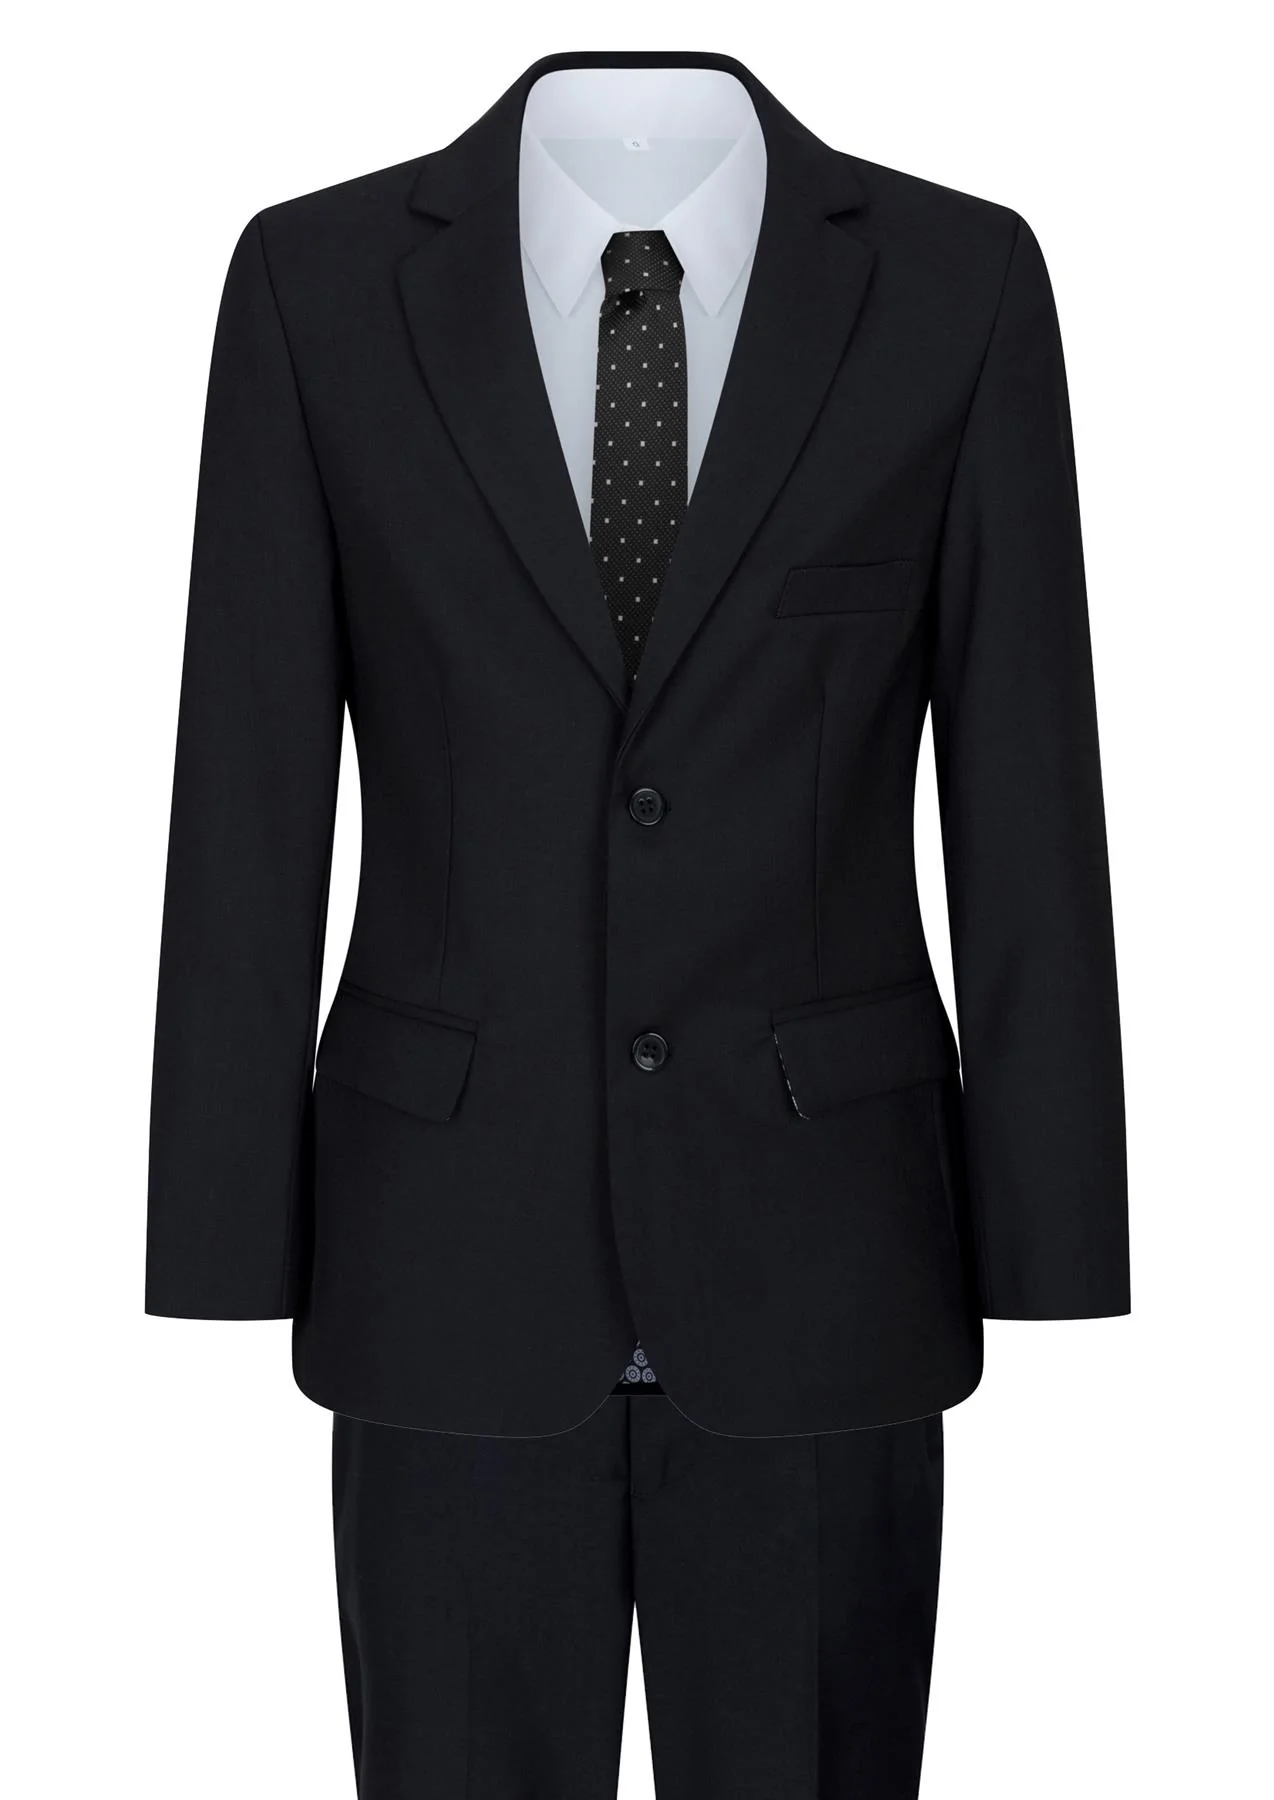 Mens Funeral Attire Funeral Outfit Funeral Clothes Solid Black Suit By ...